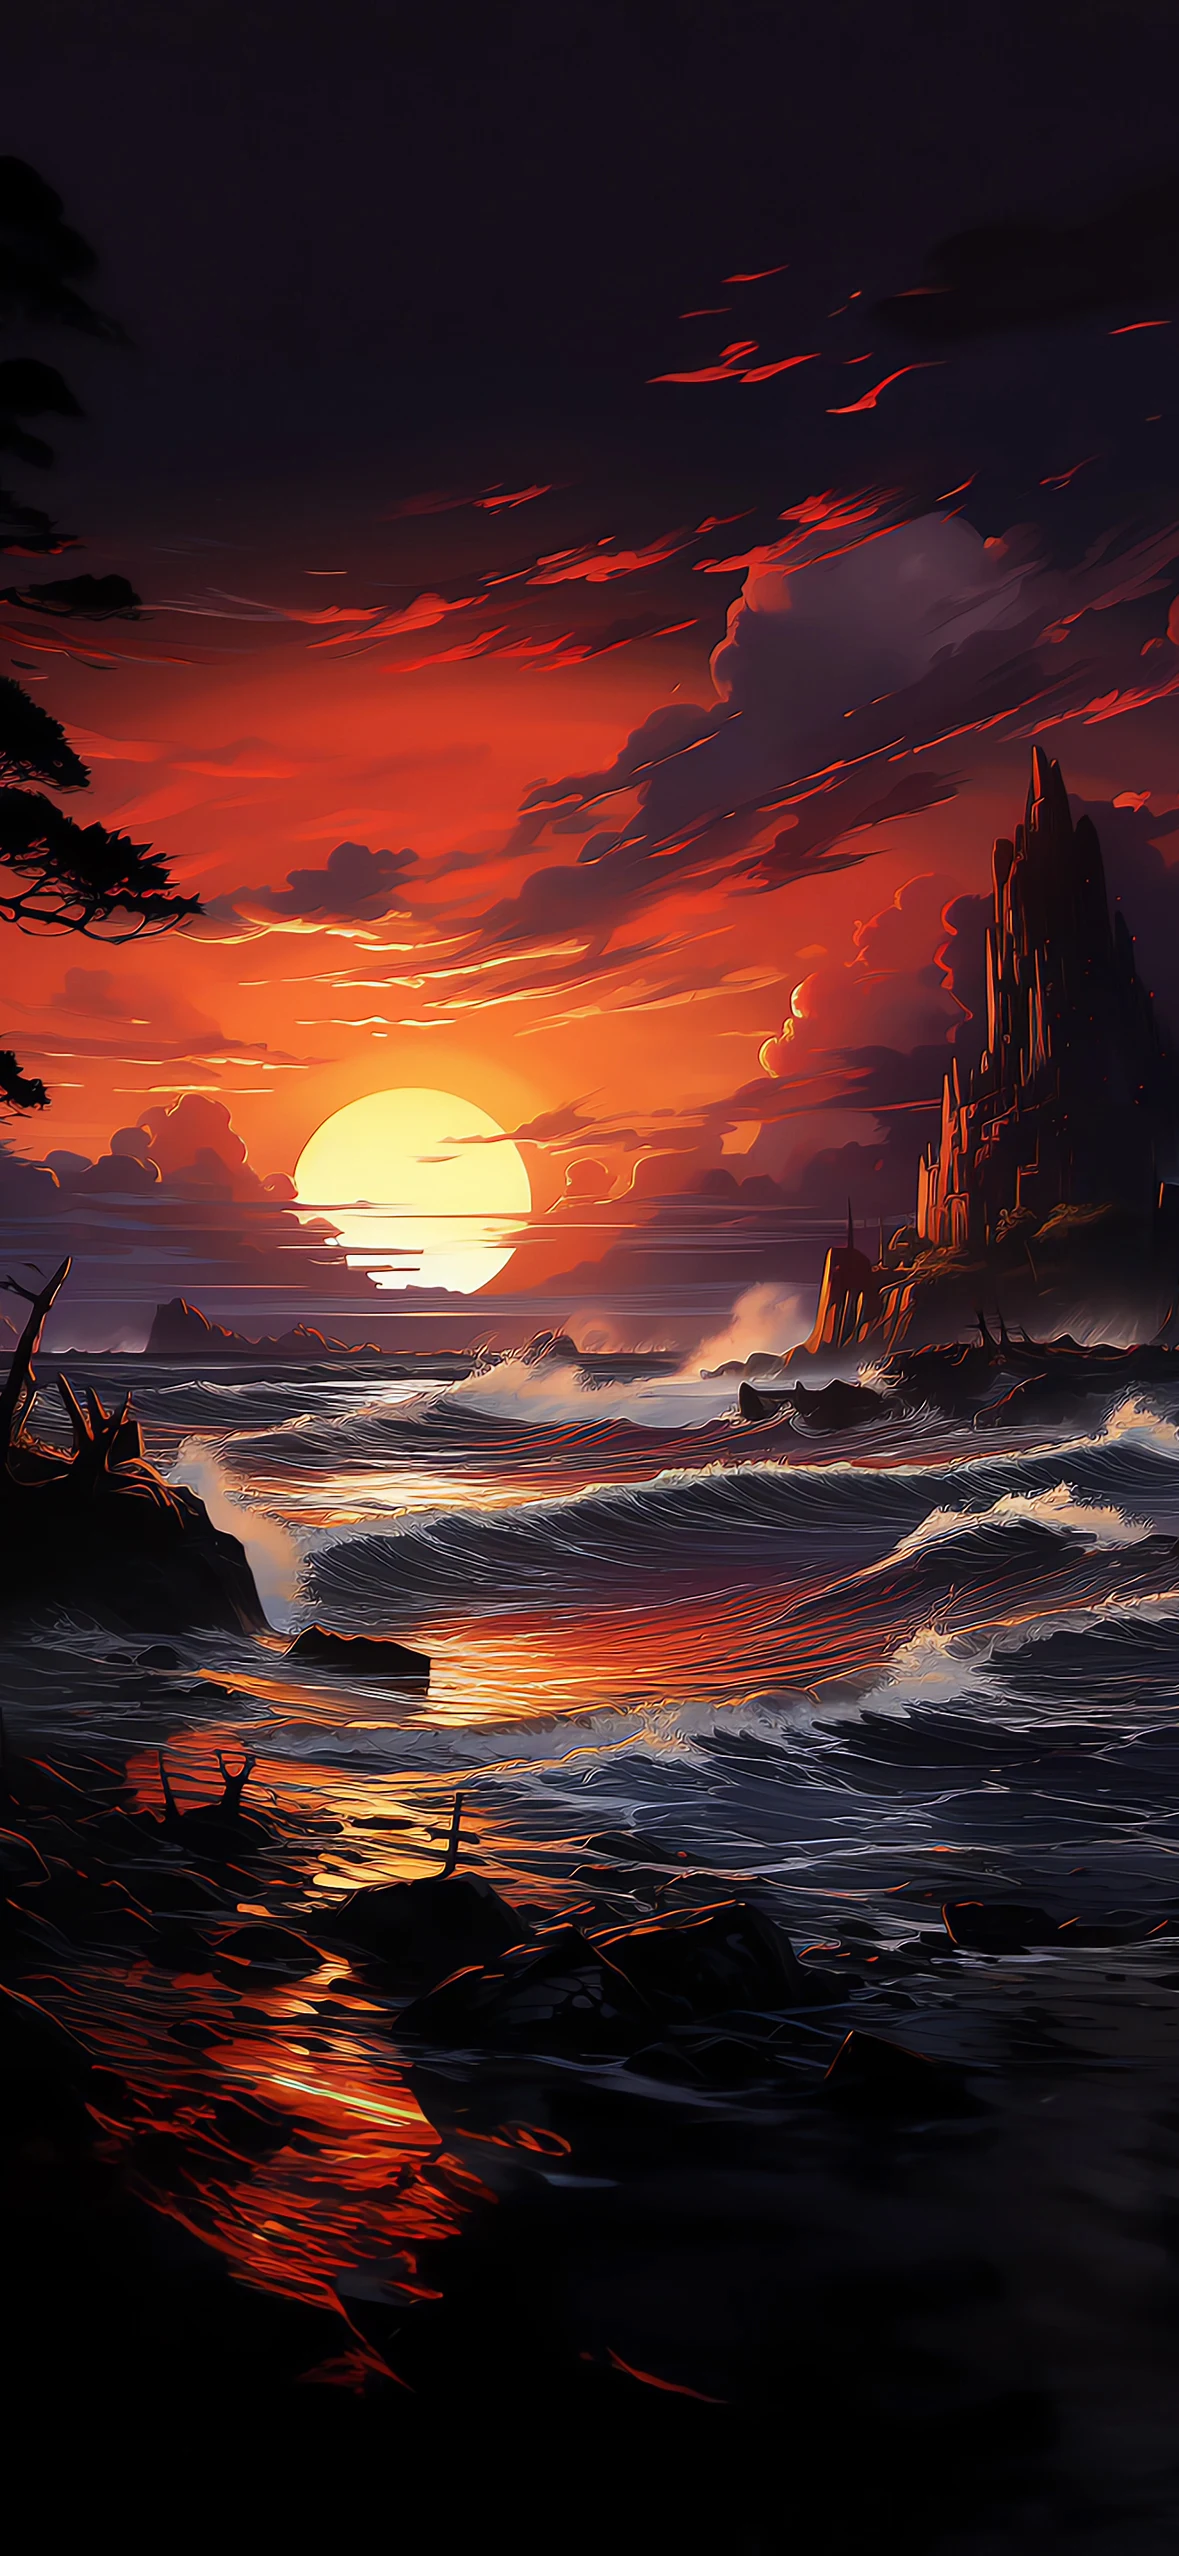 Digital painting of a dramatic sunset over a rough sea with silhouetted pine trees and jagged cliffs under a fiery orange and red sky.